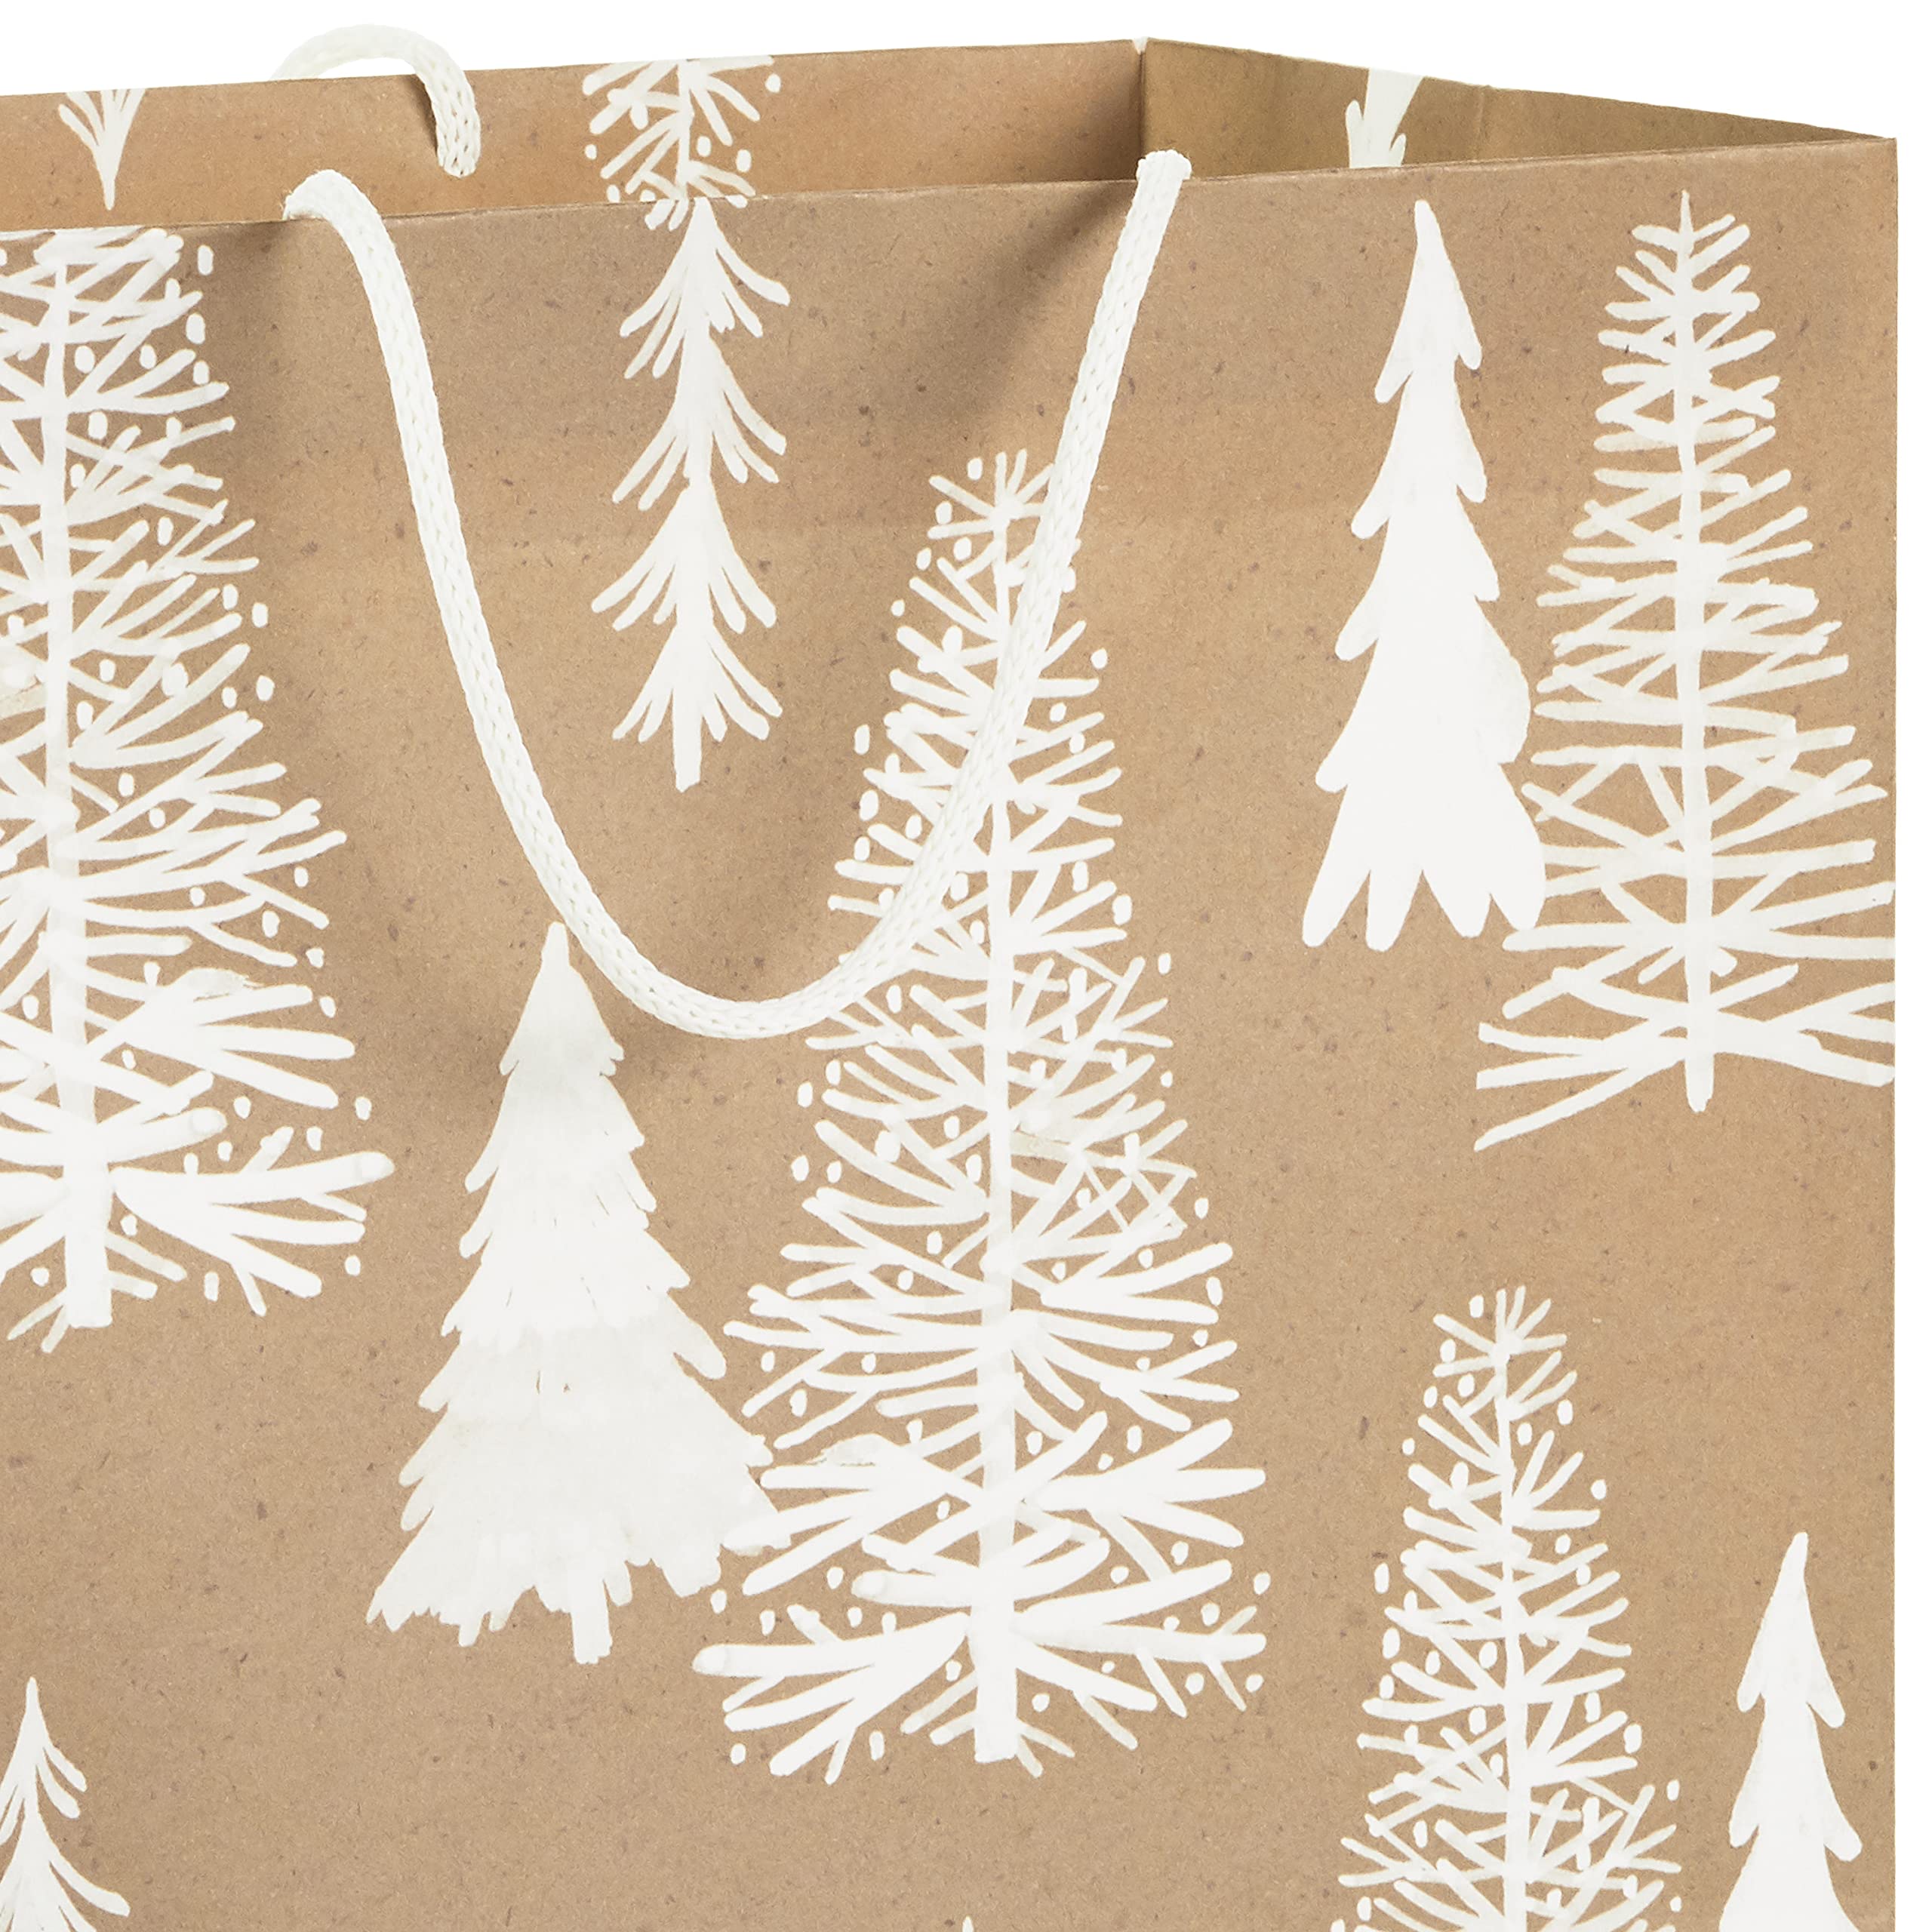 Hallmark Recyclable Holiday Gift Bags (8 Bags: 3 Small 6